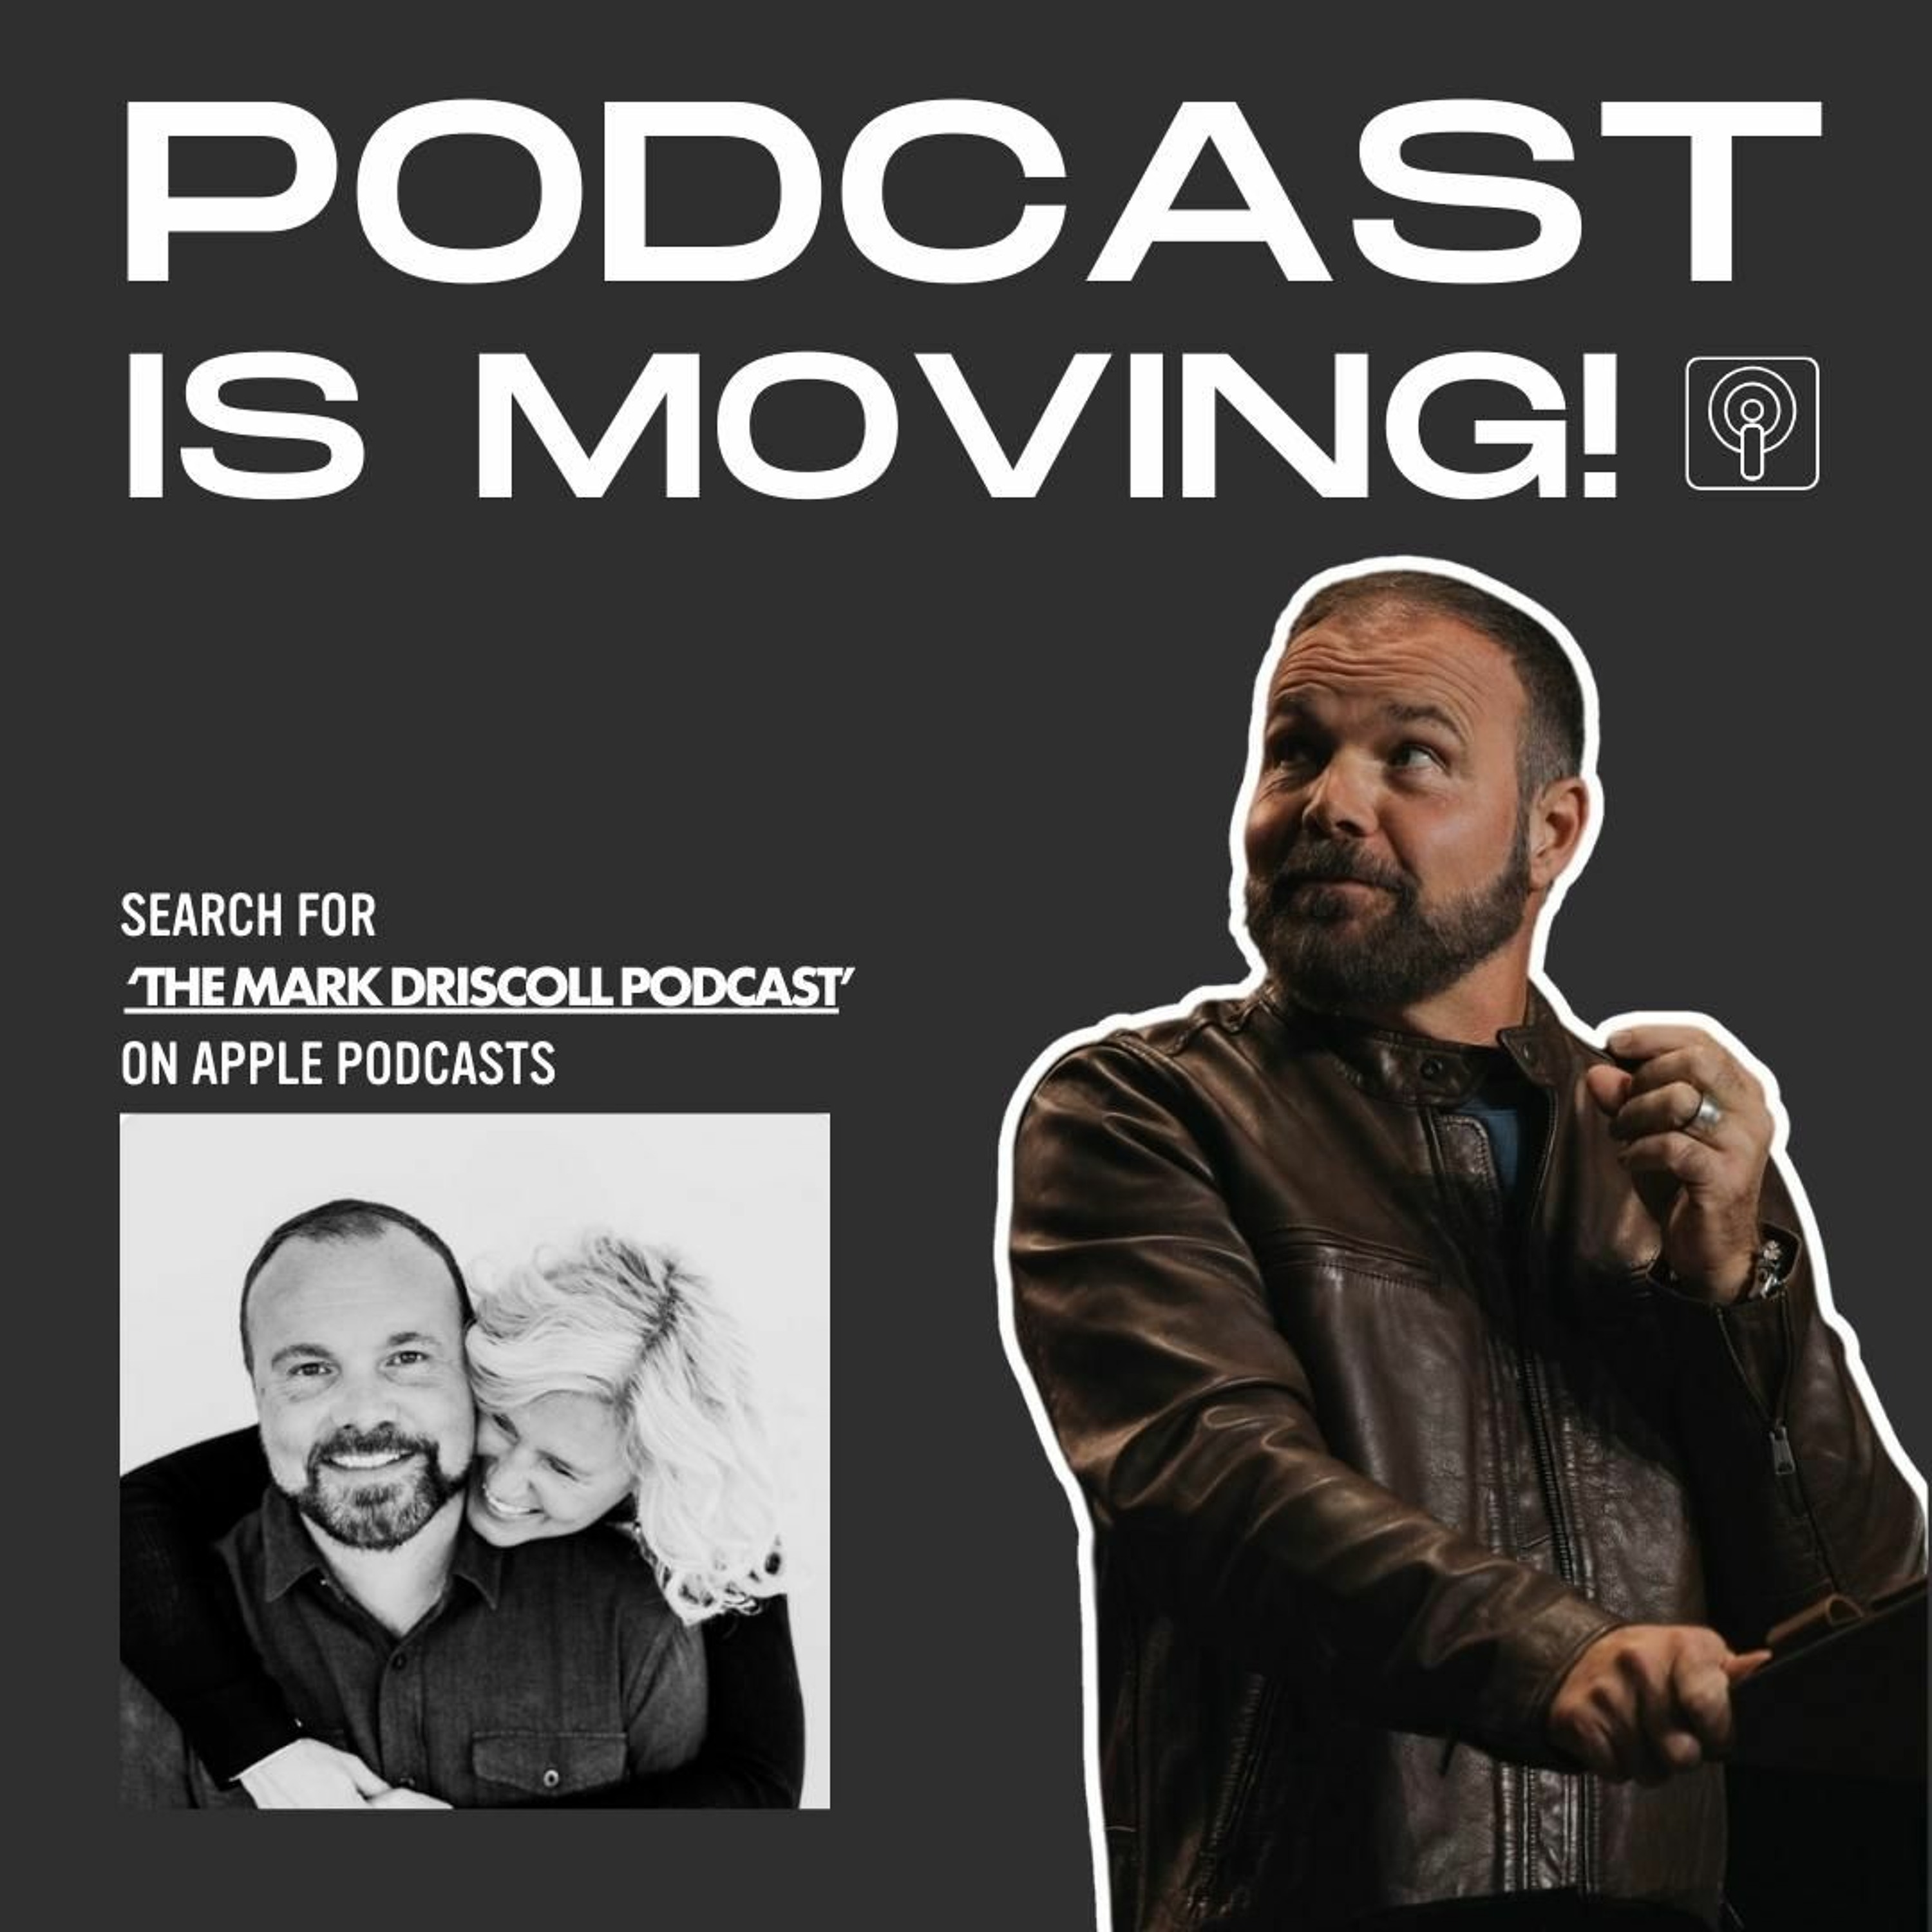 The Podcast is Moving!